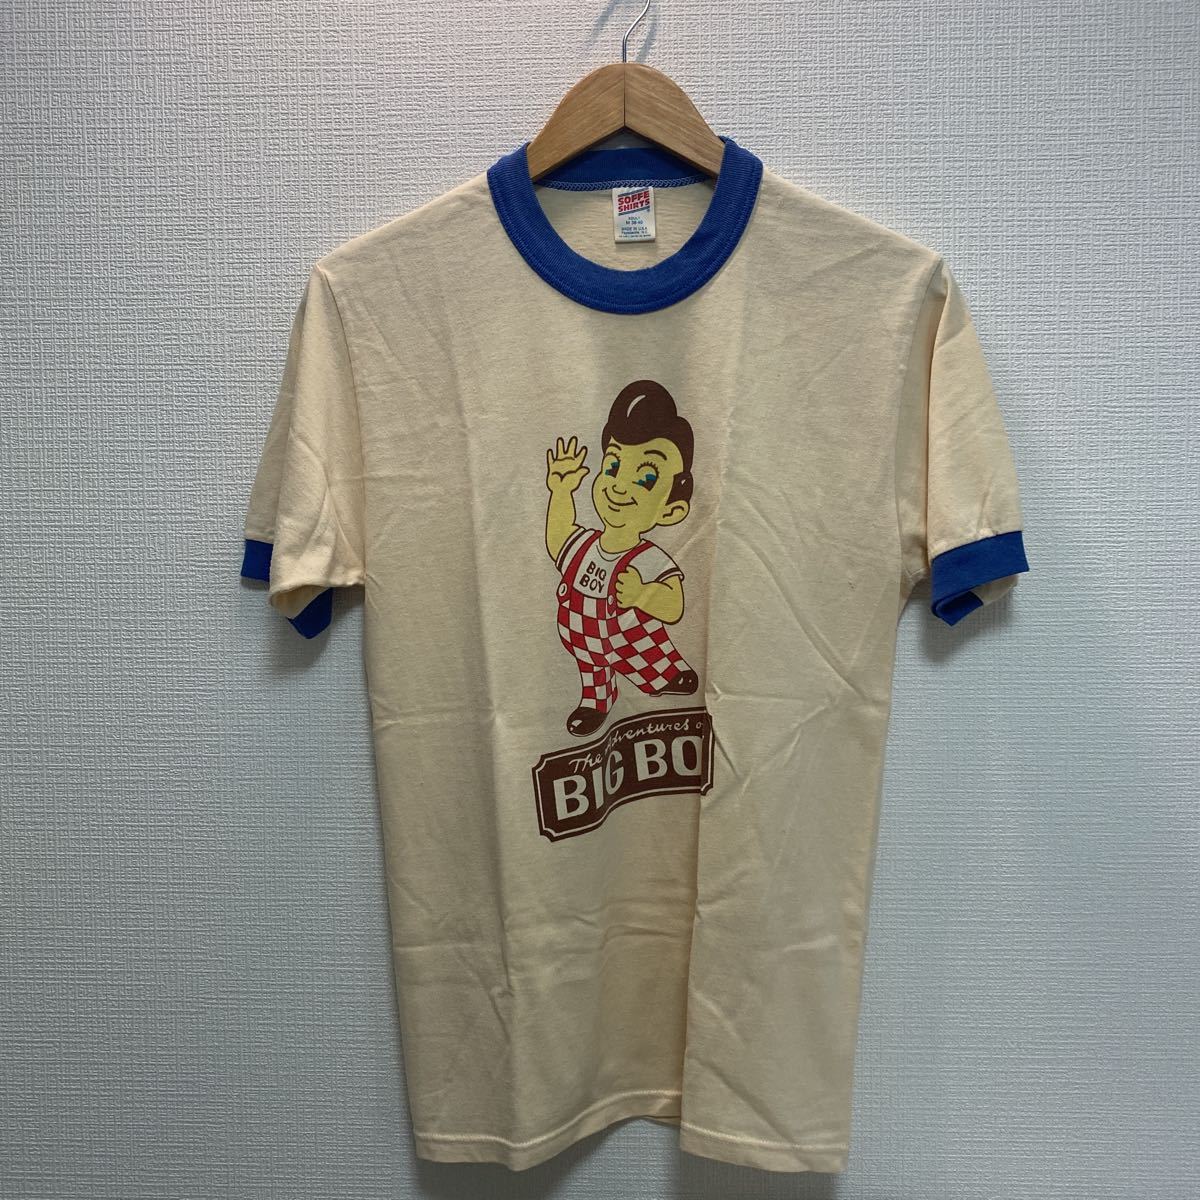 USA製 90s Lee BIGBOY 1995 コピーライト 企業 Tシャツ - library 